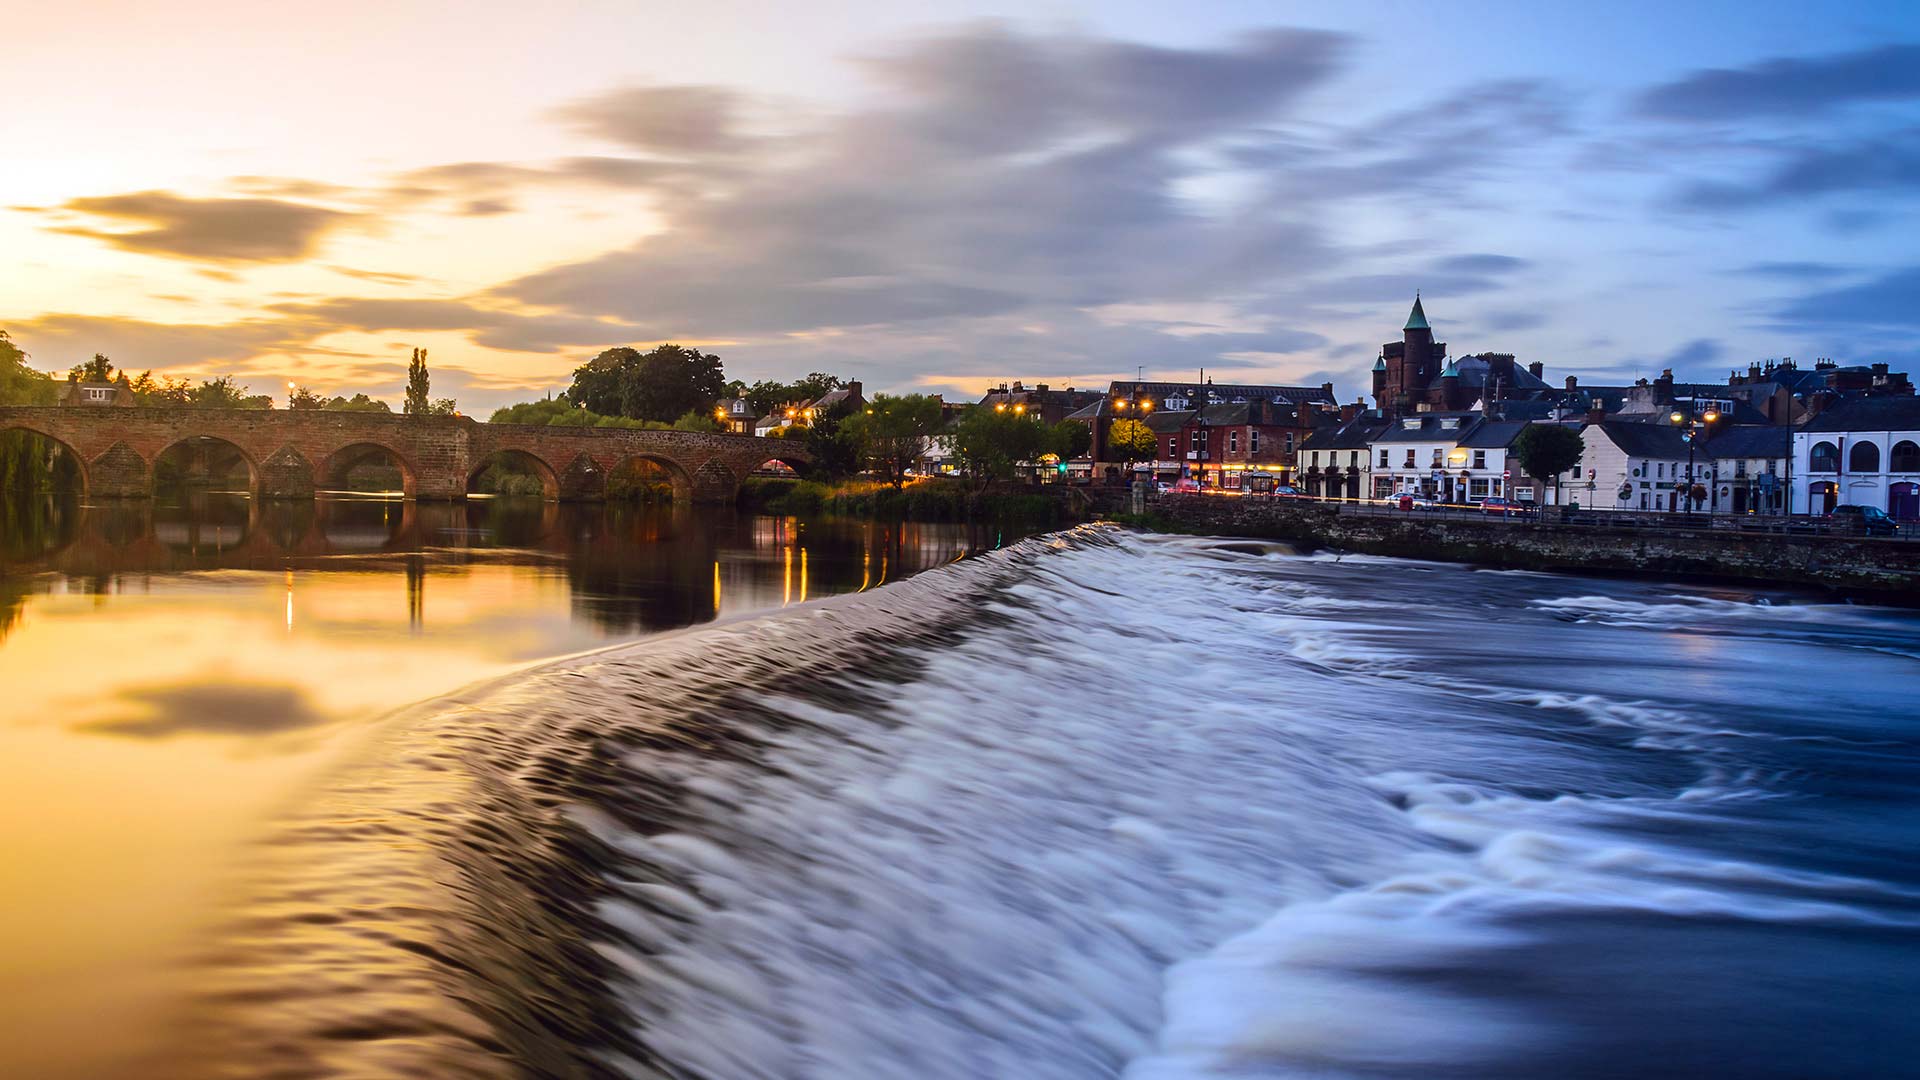 Panorama to illustrate dating in dumfries